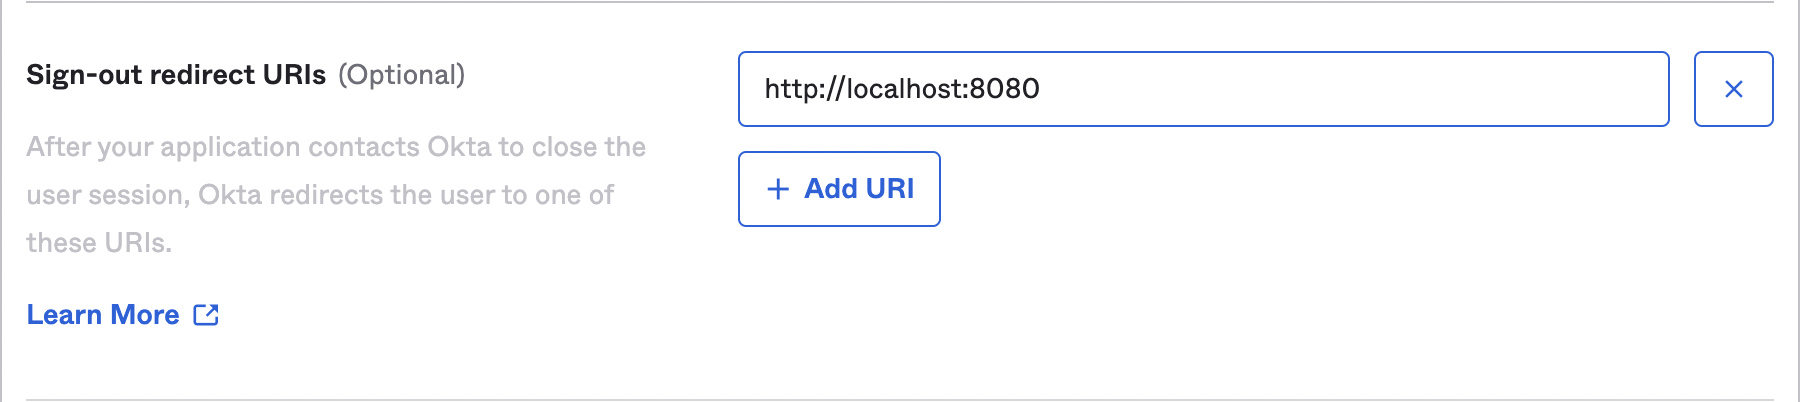 Sign-out redirect URIs Before